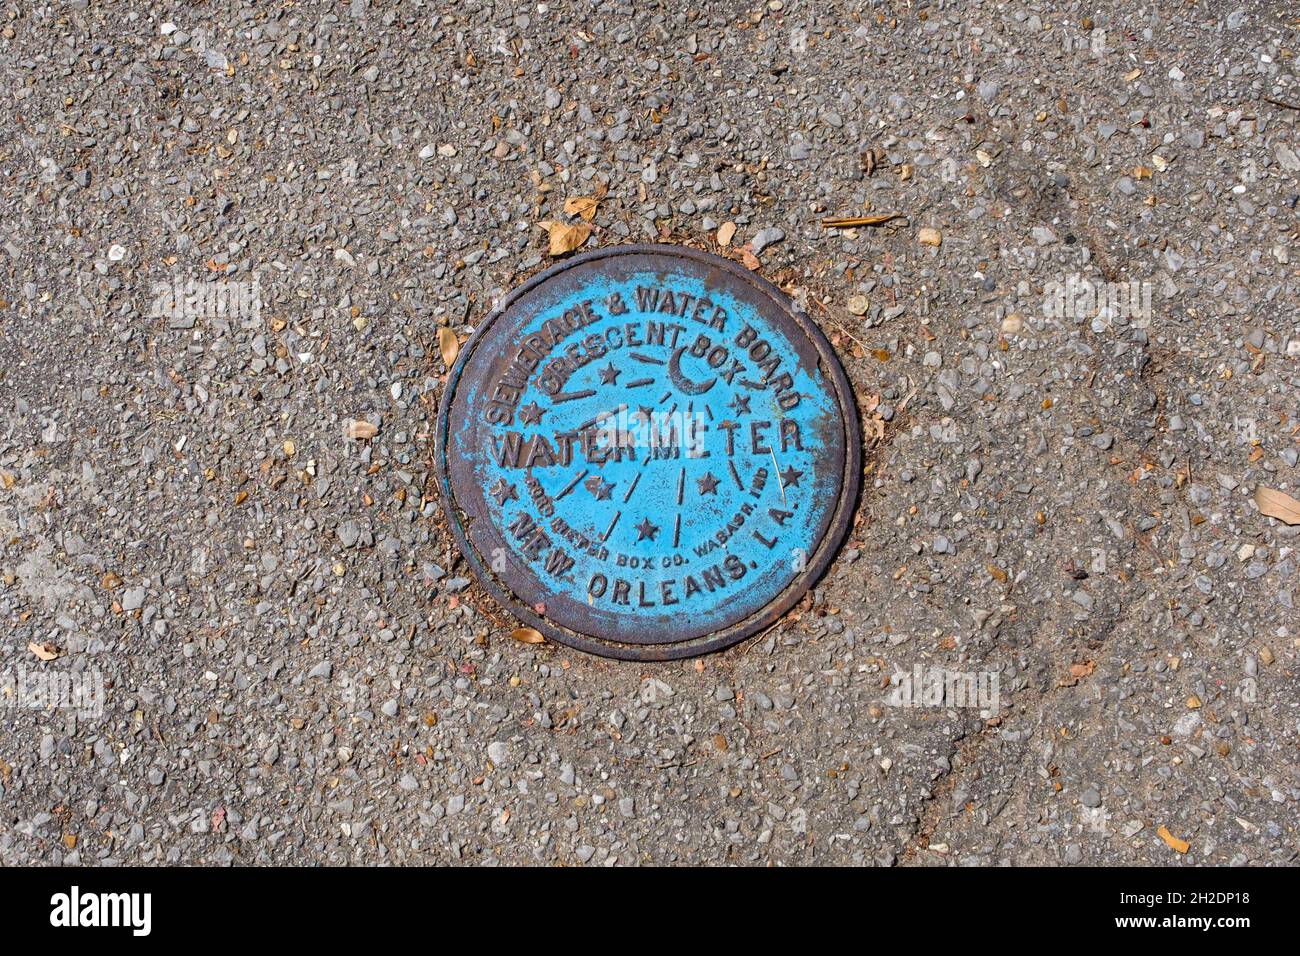 NEW ORLEANS, LA, USA - OCTOBER 16, 2021: Metal water meter cover for New Orleans Sewerage and Water Board Stock Photo